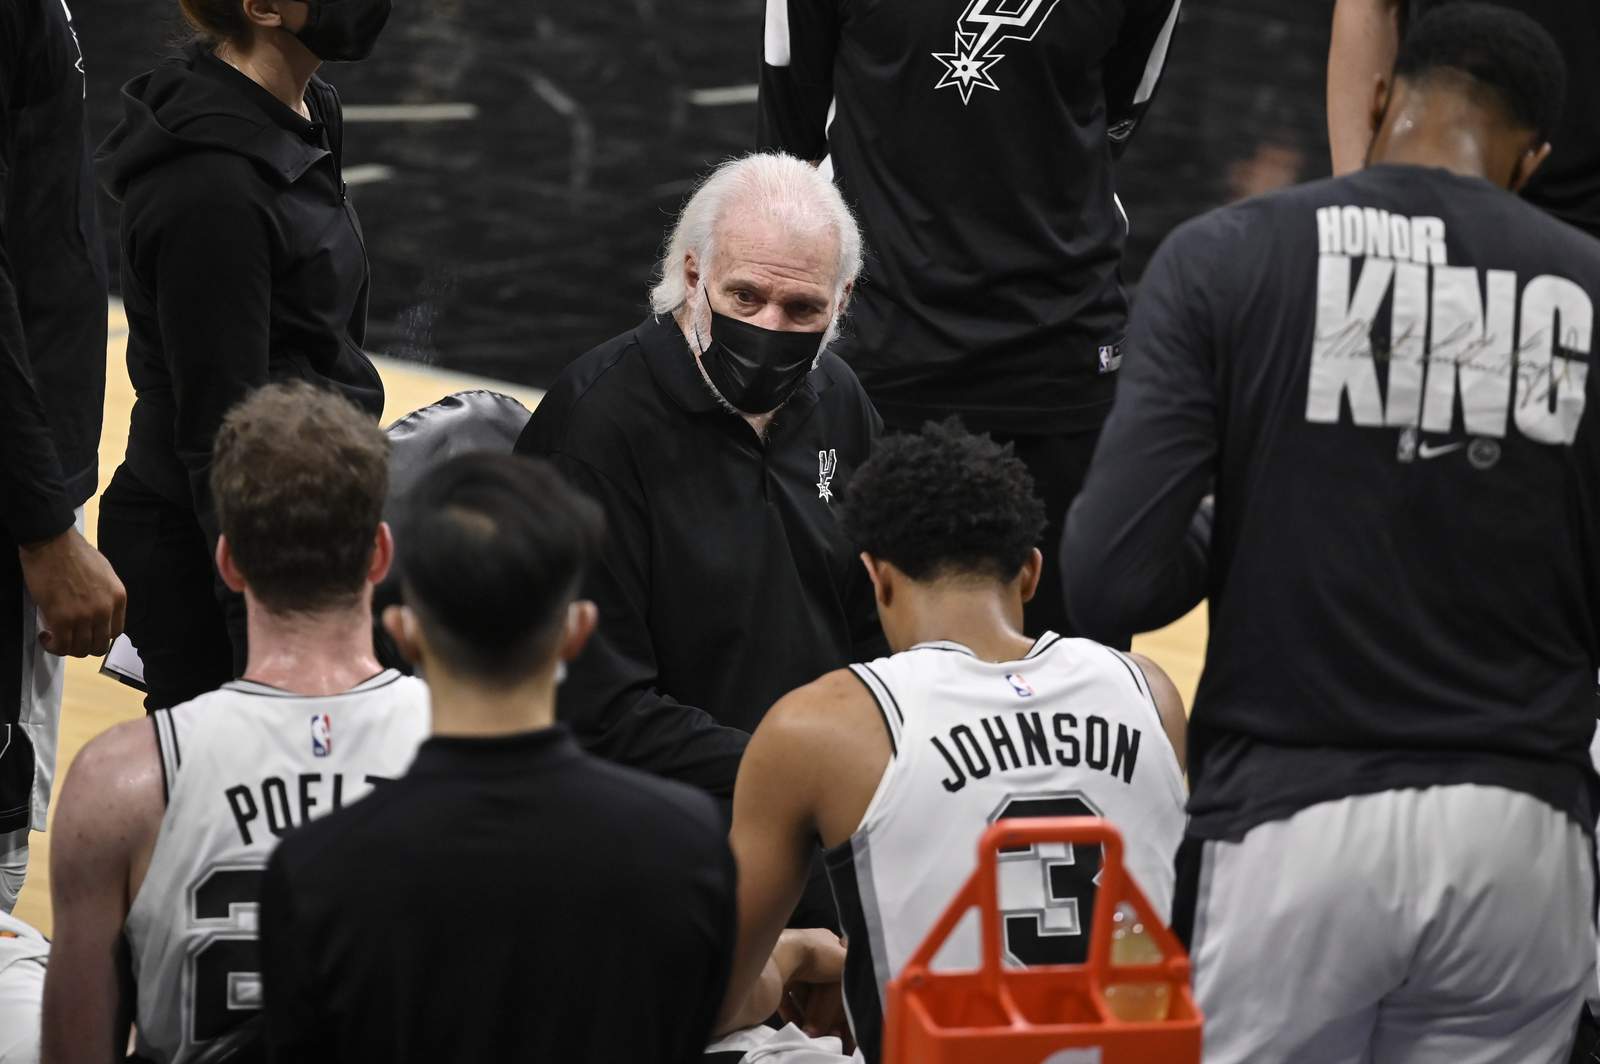 Spurs-Pelicans game called off, as NBA's virus woes continue